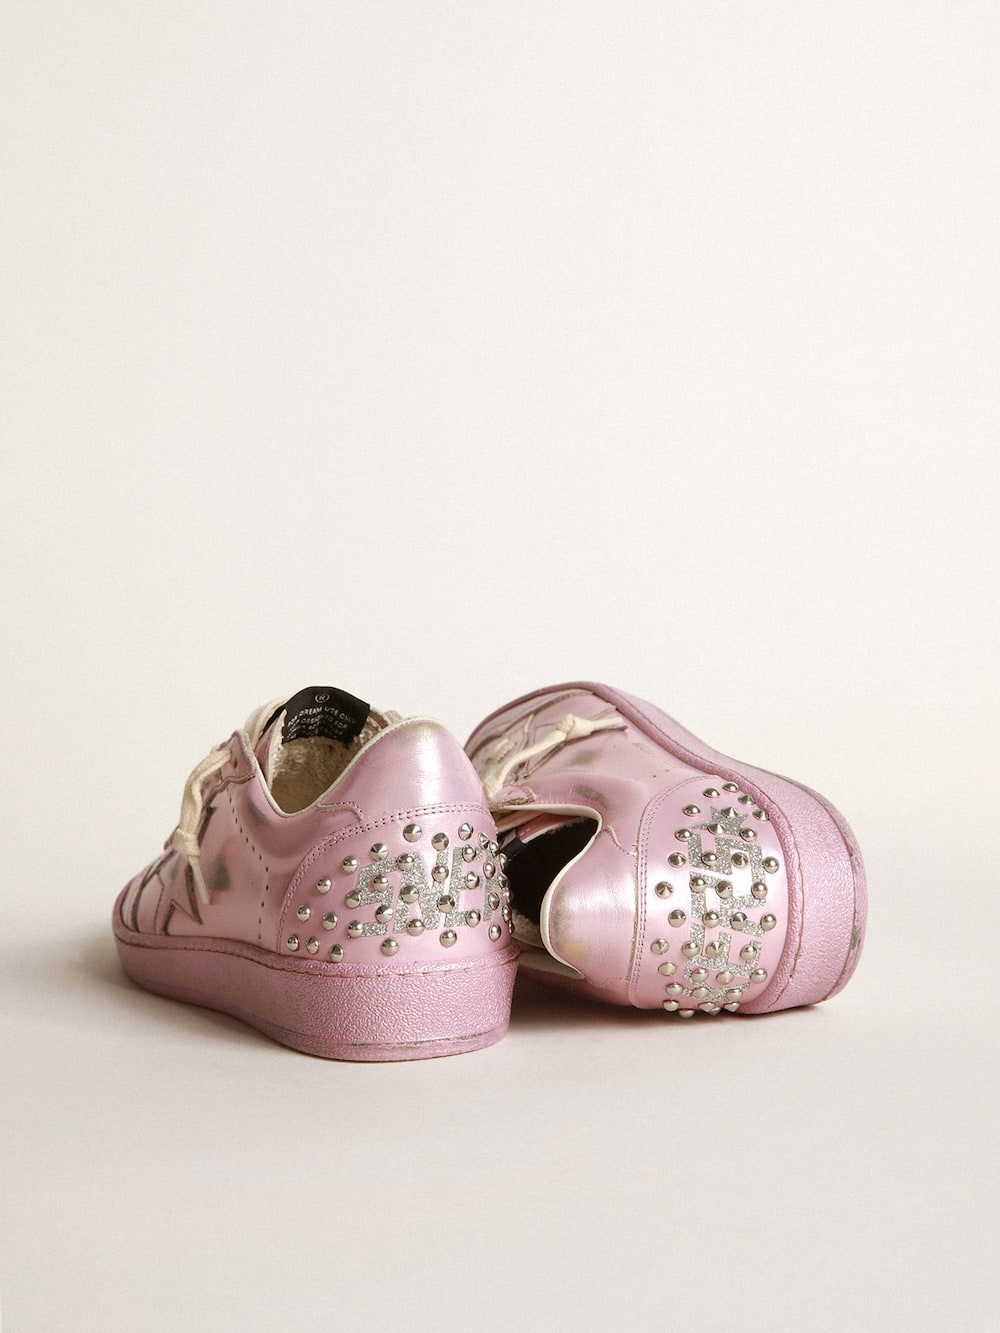 Golden Goose - Women’s Ball Star LAB in pink laminated leather with studs in 